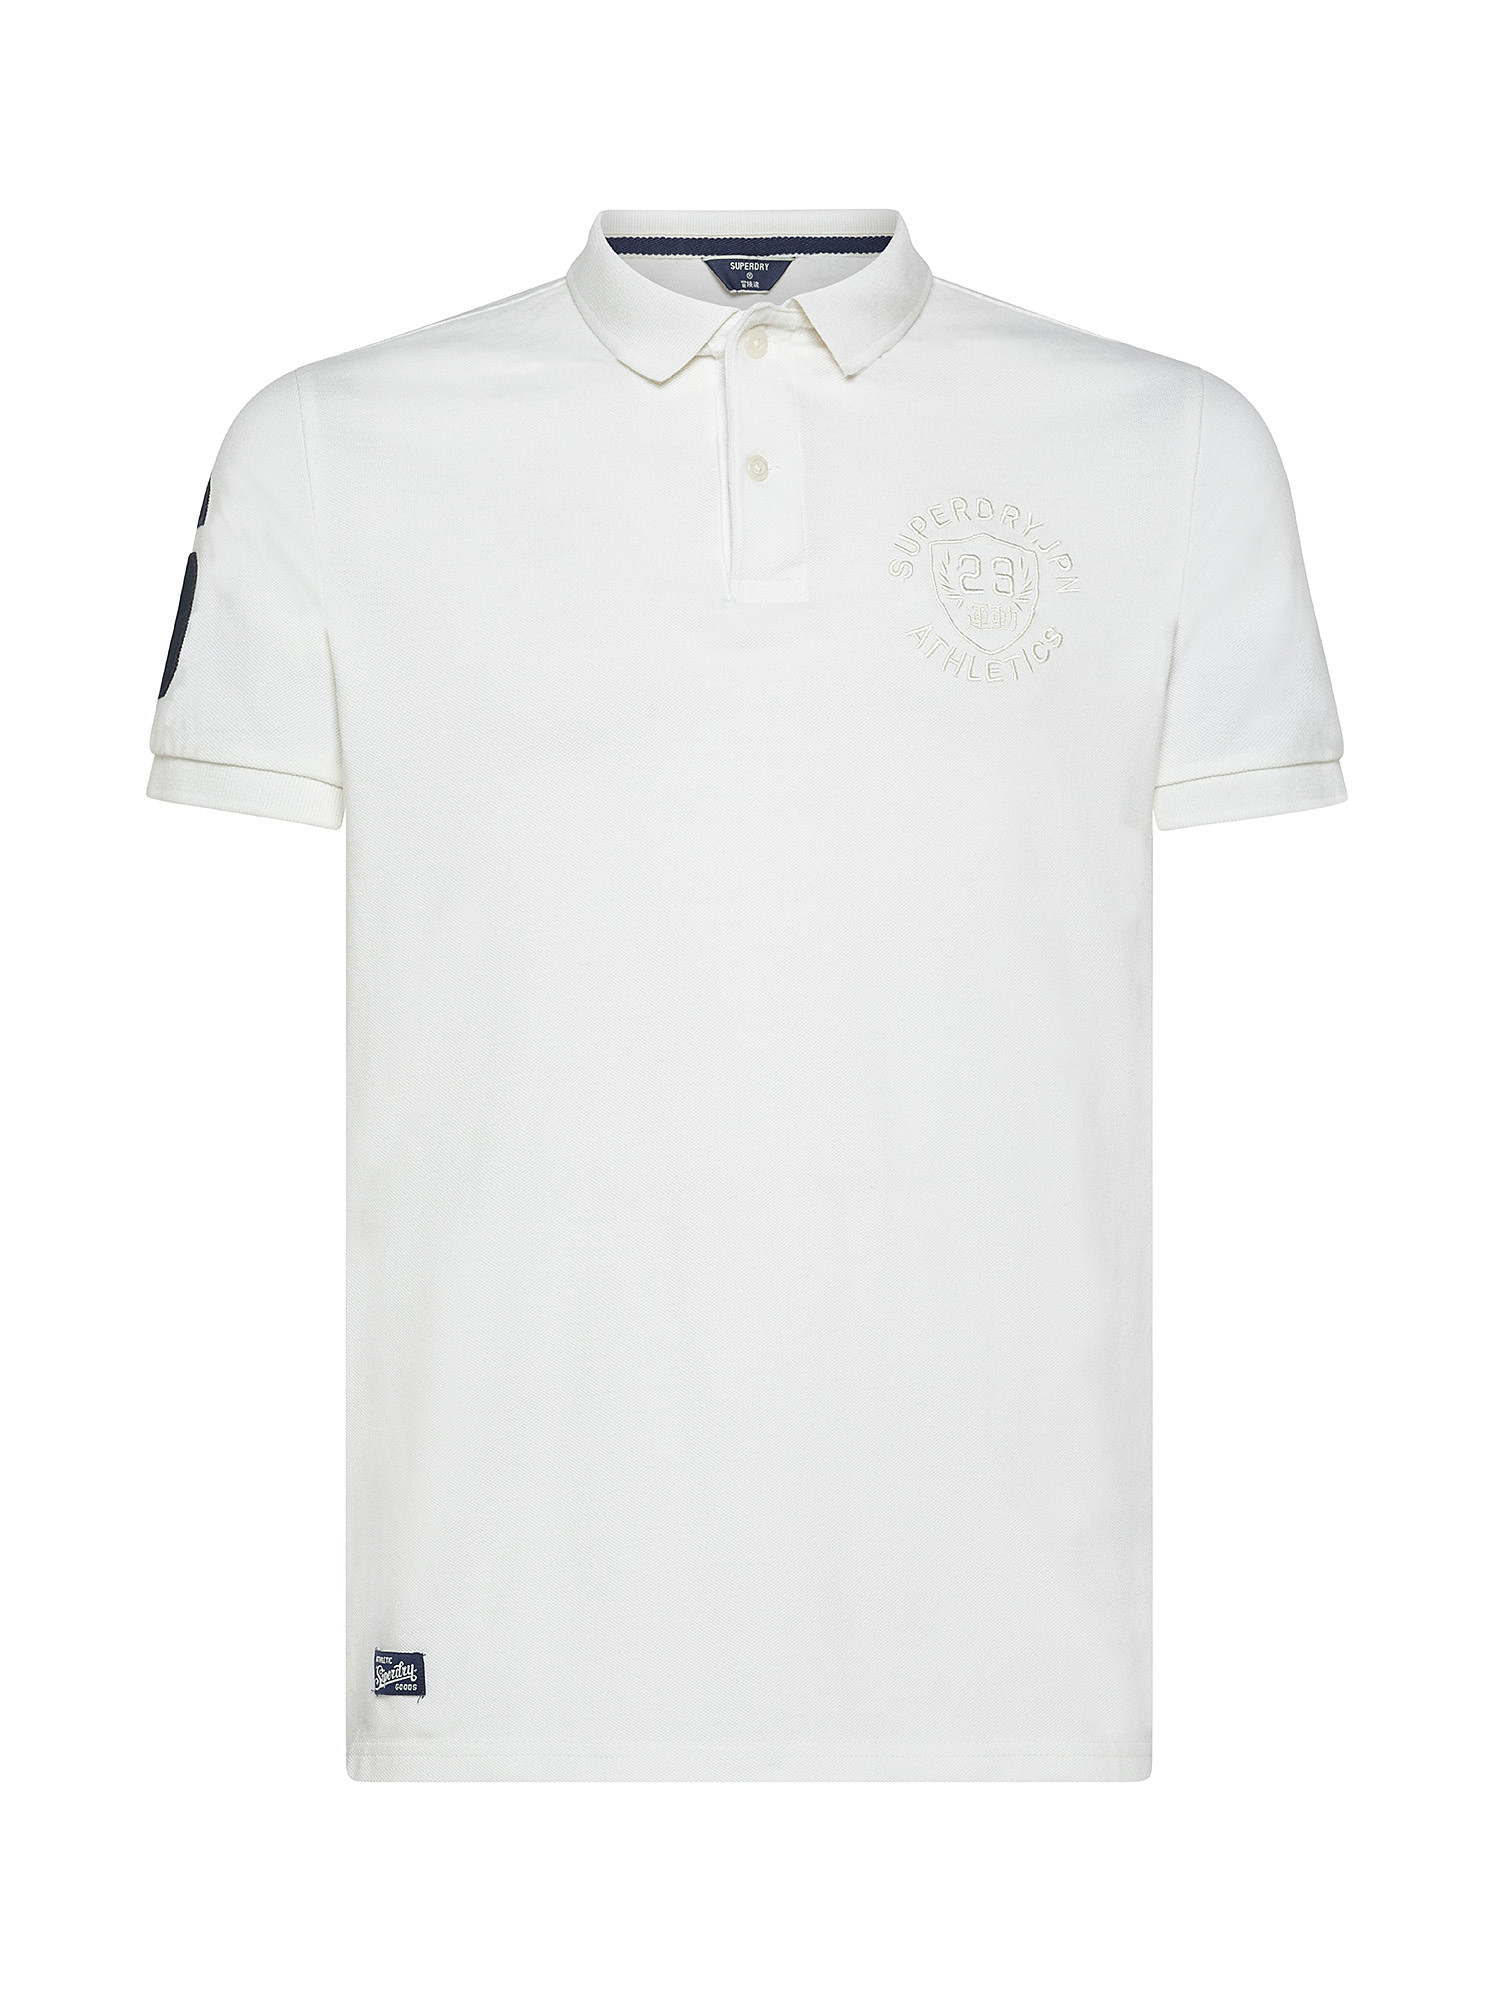 Polo shirt with embroidered graphics, White Ivory, large image number 0